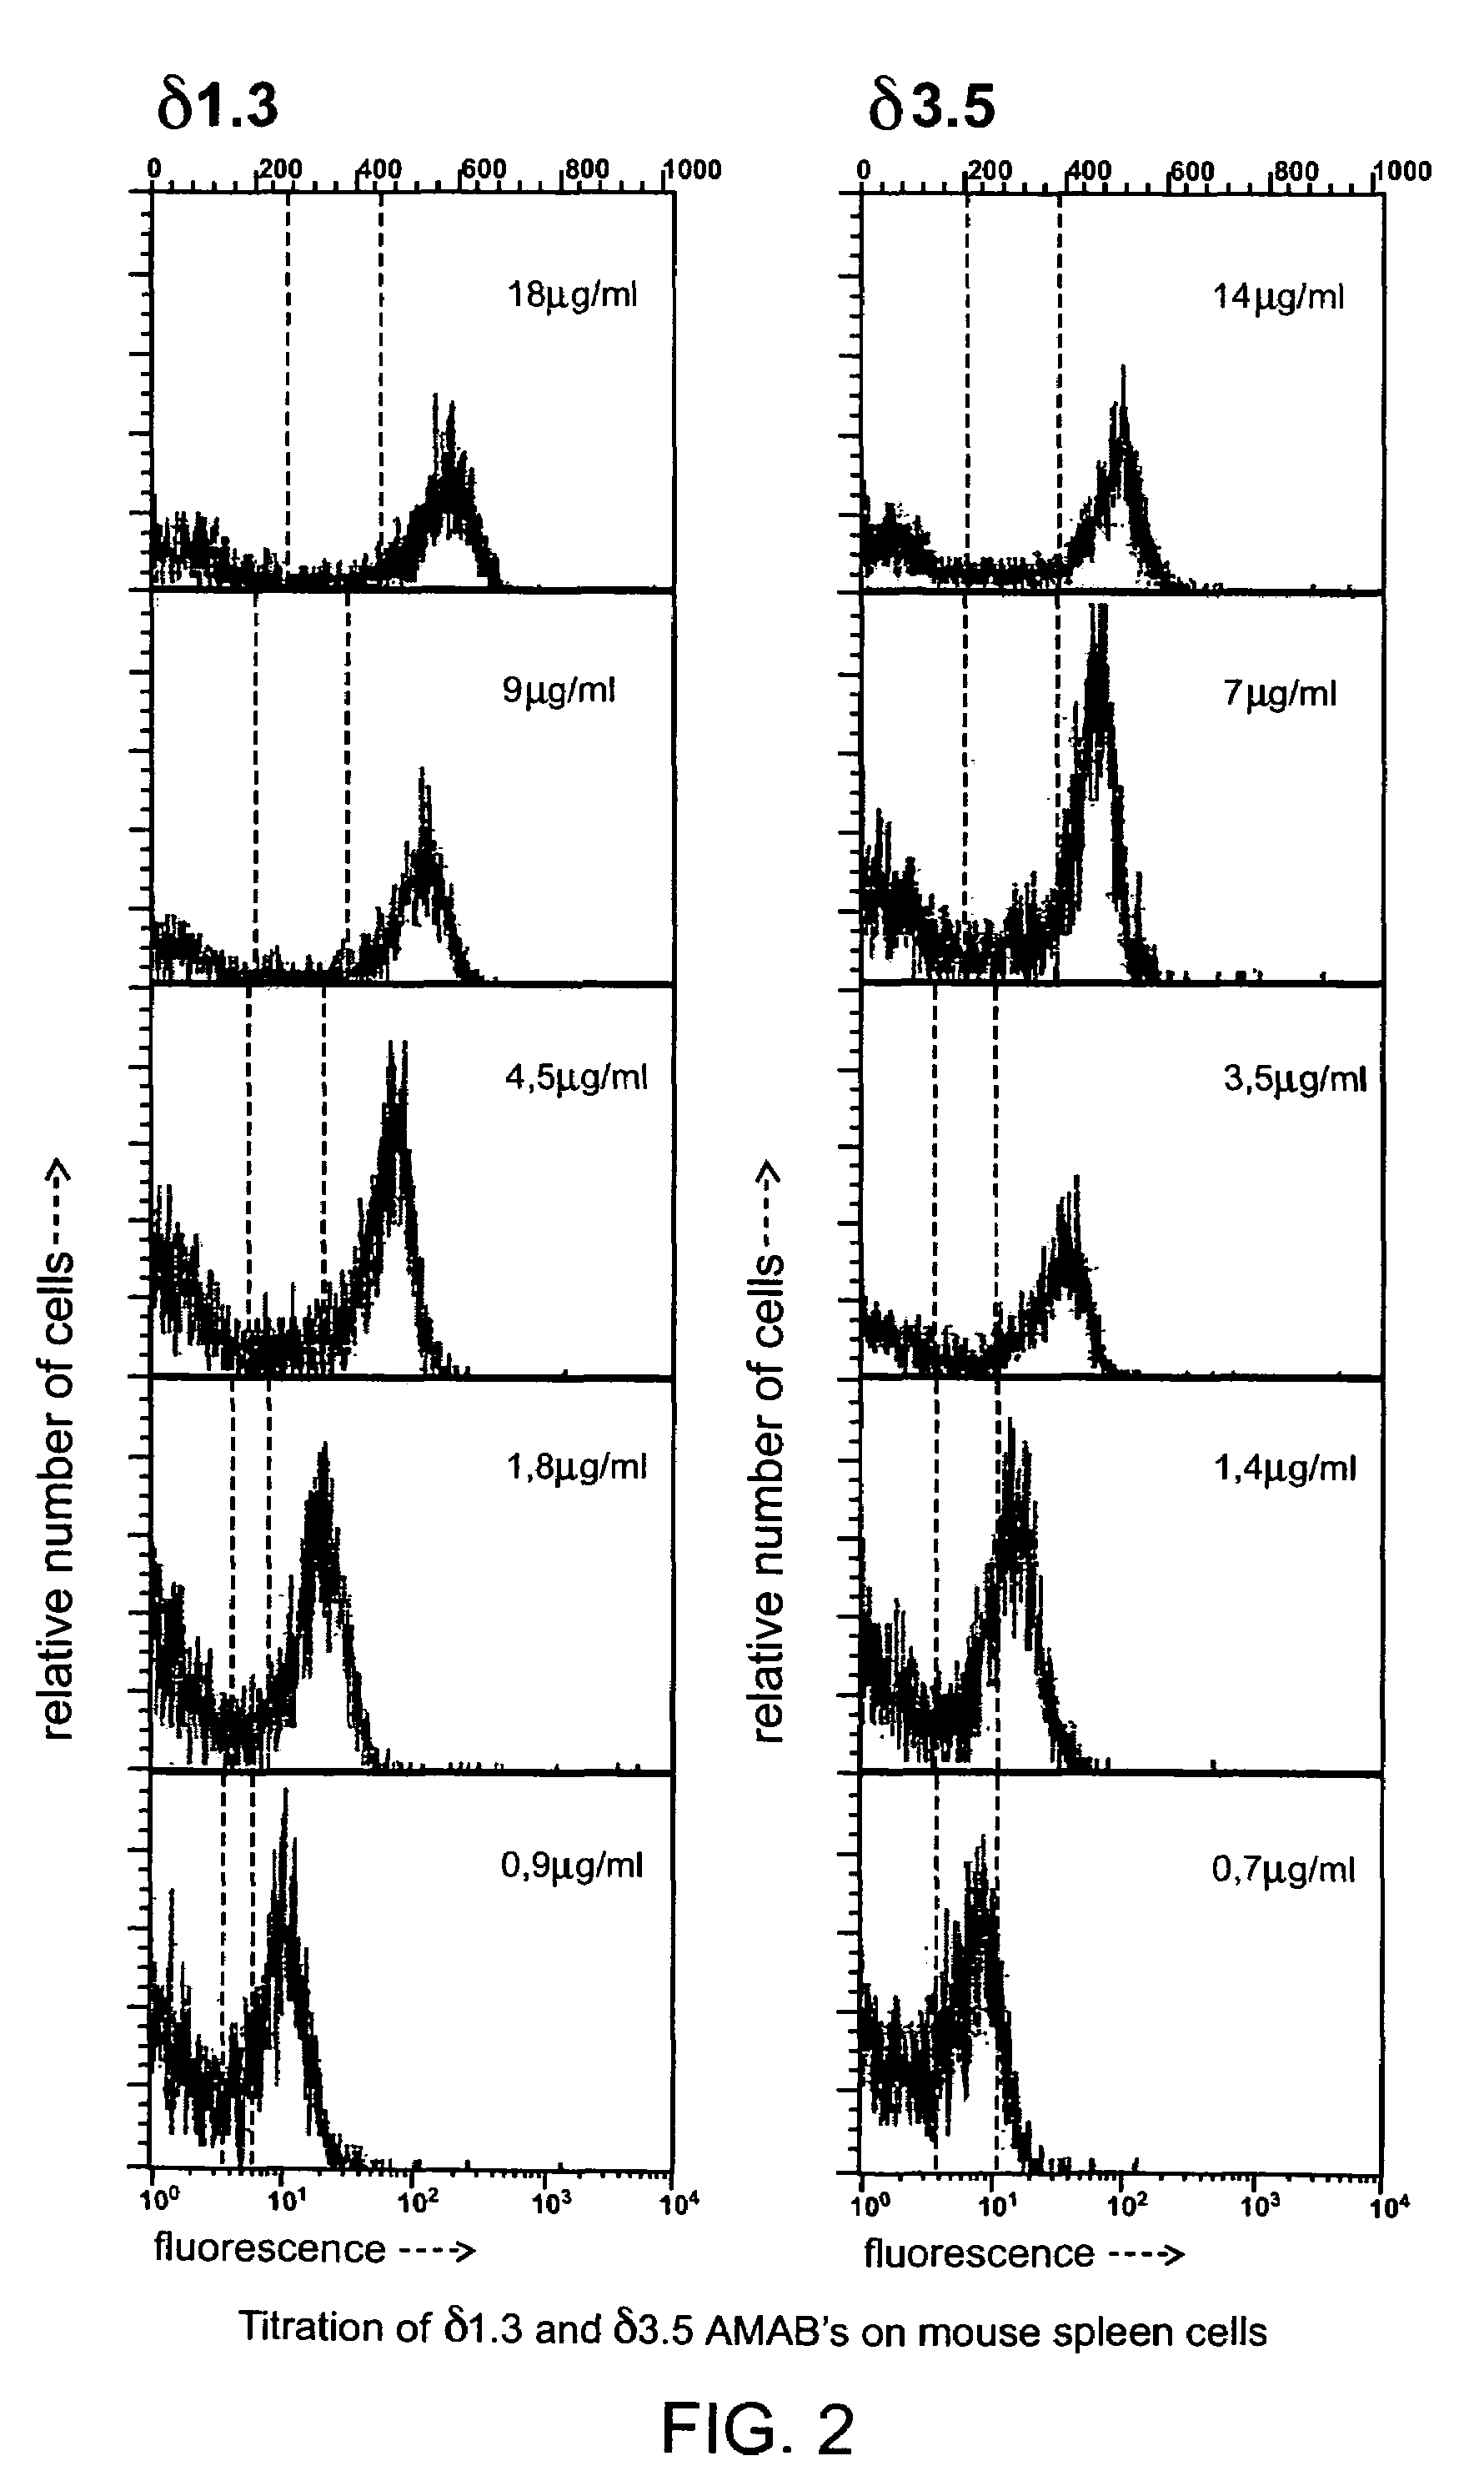 Antibodies against epitopes with homology to self antigens, methods of preparation and applications thereof